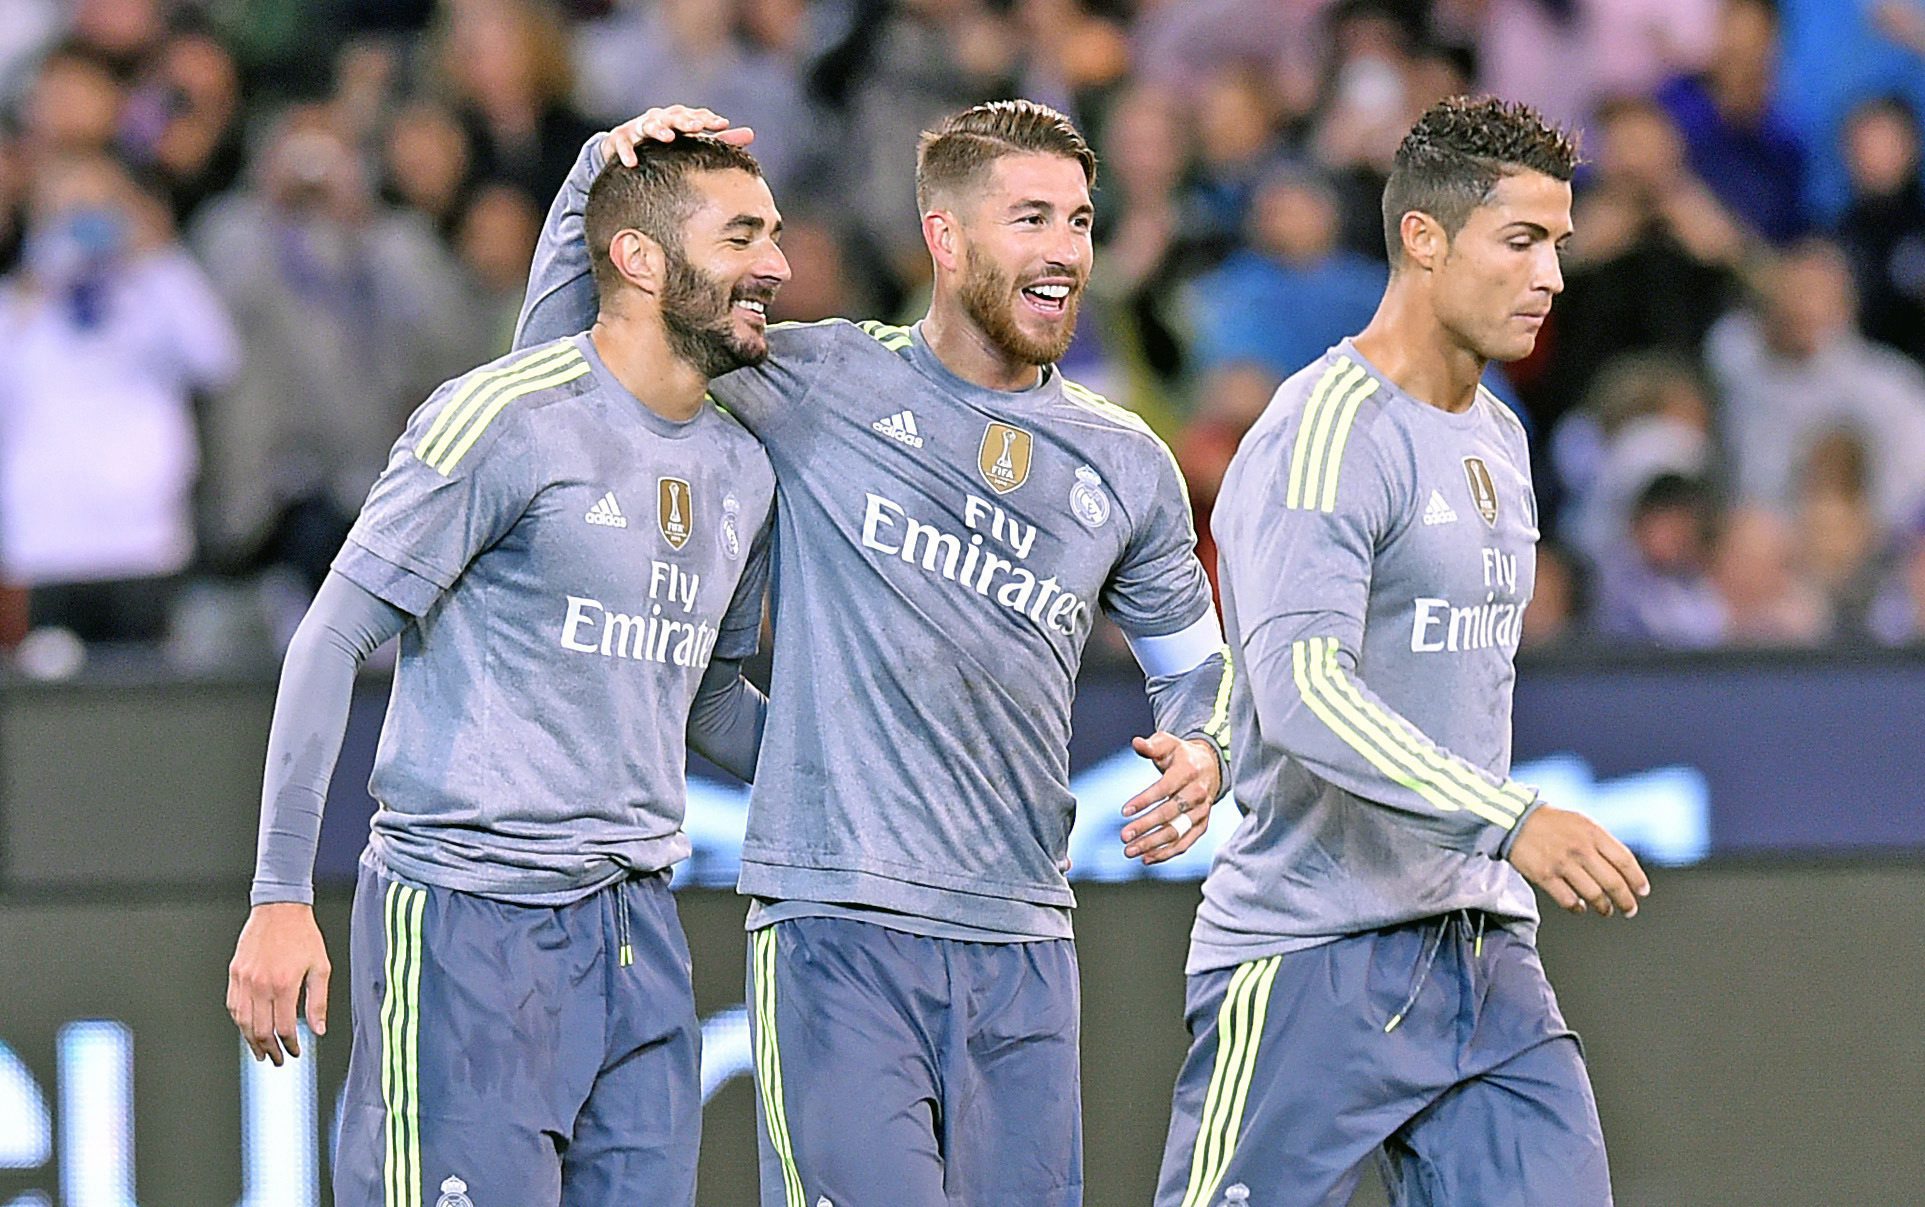 Benzema, Ramos And Ronaldo- Will They Stay At Real Madrid?